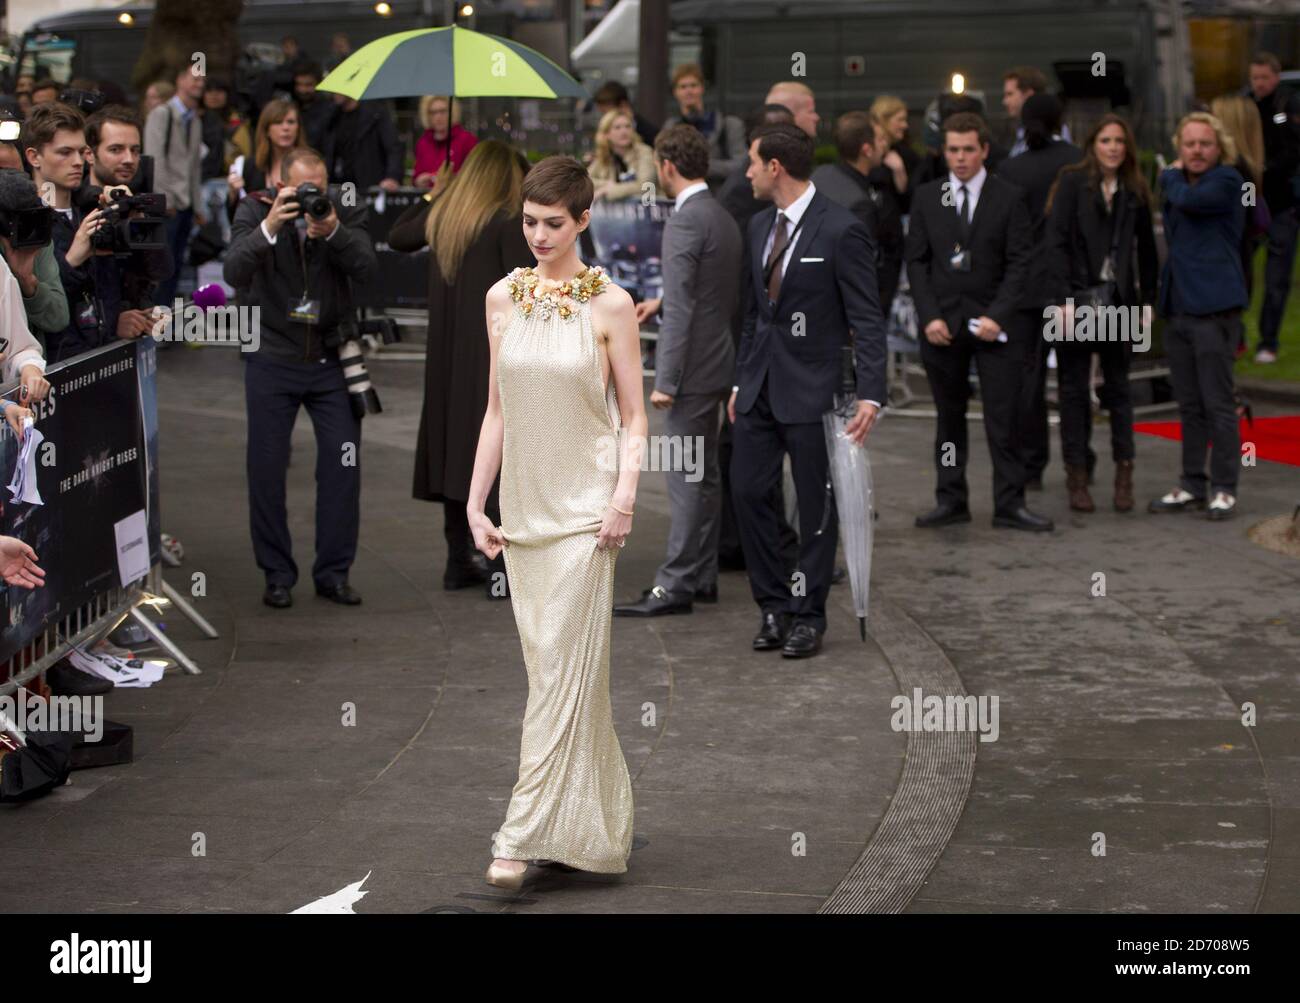 Anne Hathaway arriving at the premiere of The Dark Knight Rises, at the ...